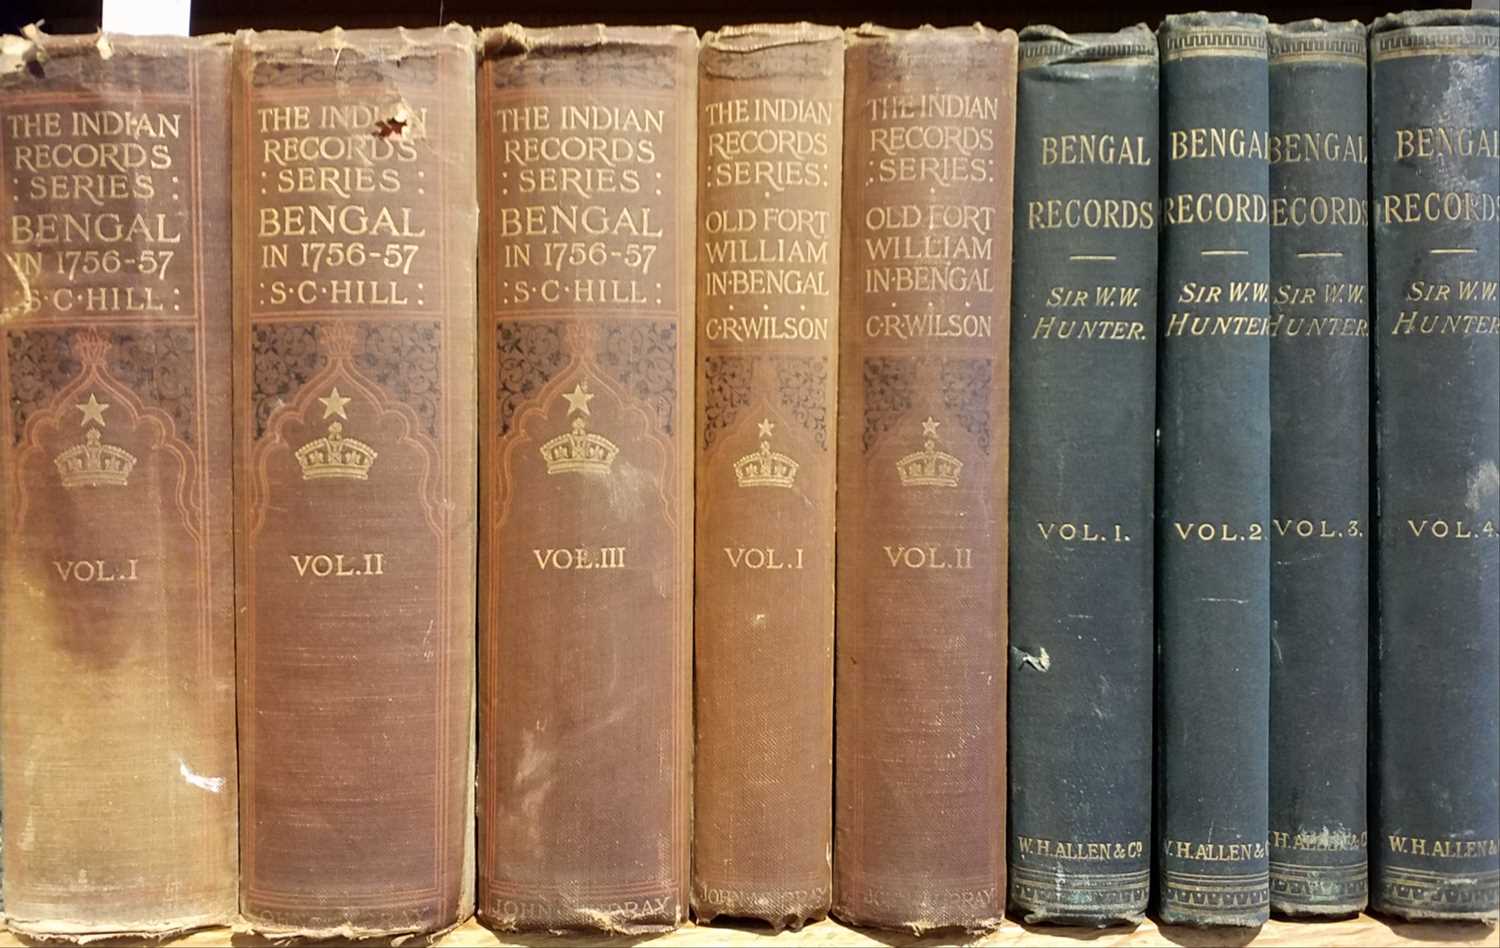 Lot 23 - Hill (S. C.). Indian Records Series Bengal in 1756-1757, 3 vols., 1905